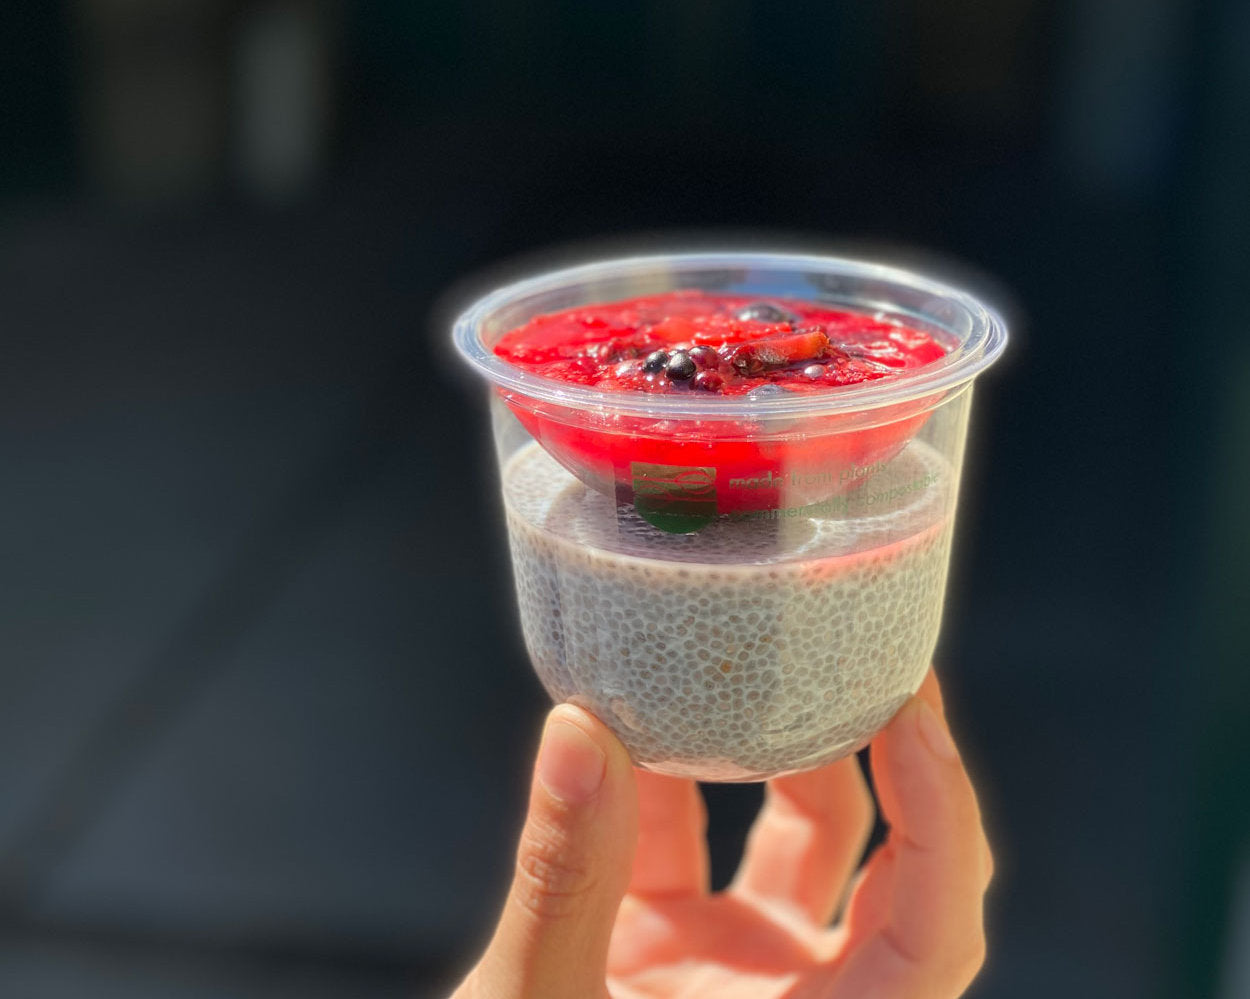 Chia Pudding and Red Fruits